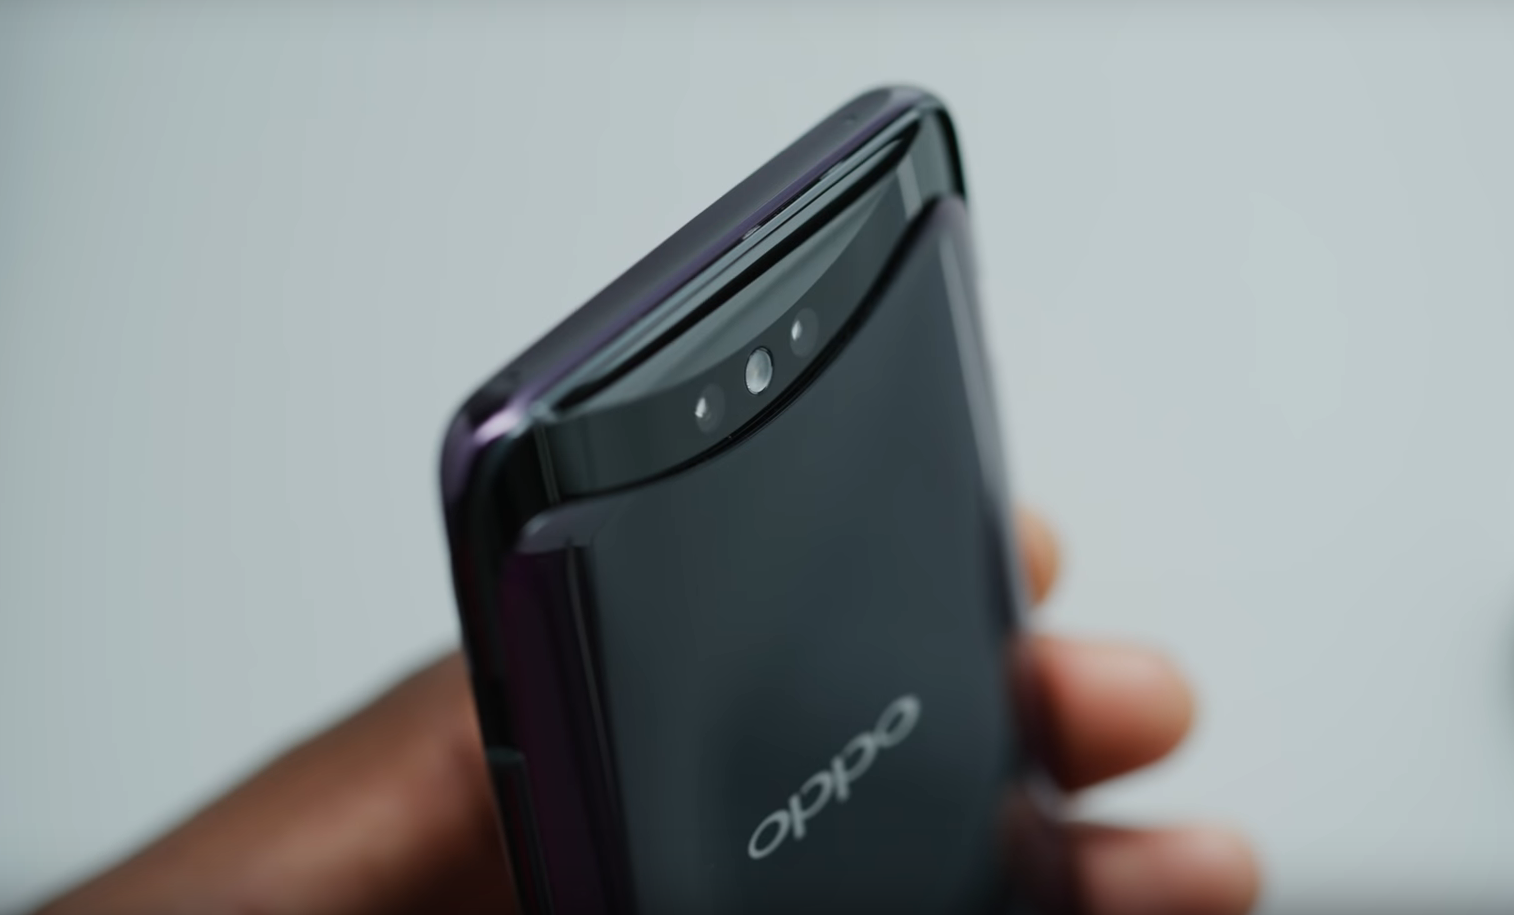 Overview of the advantages and disadvantages of the smartphone Oppo Find X